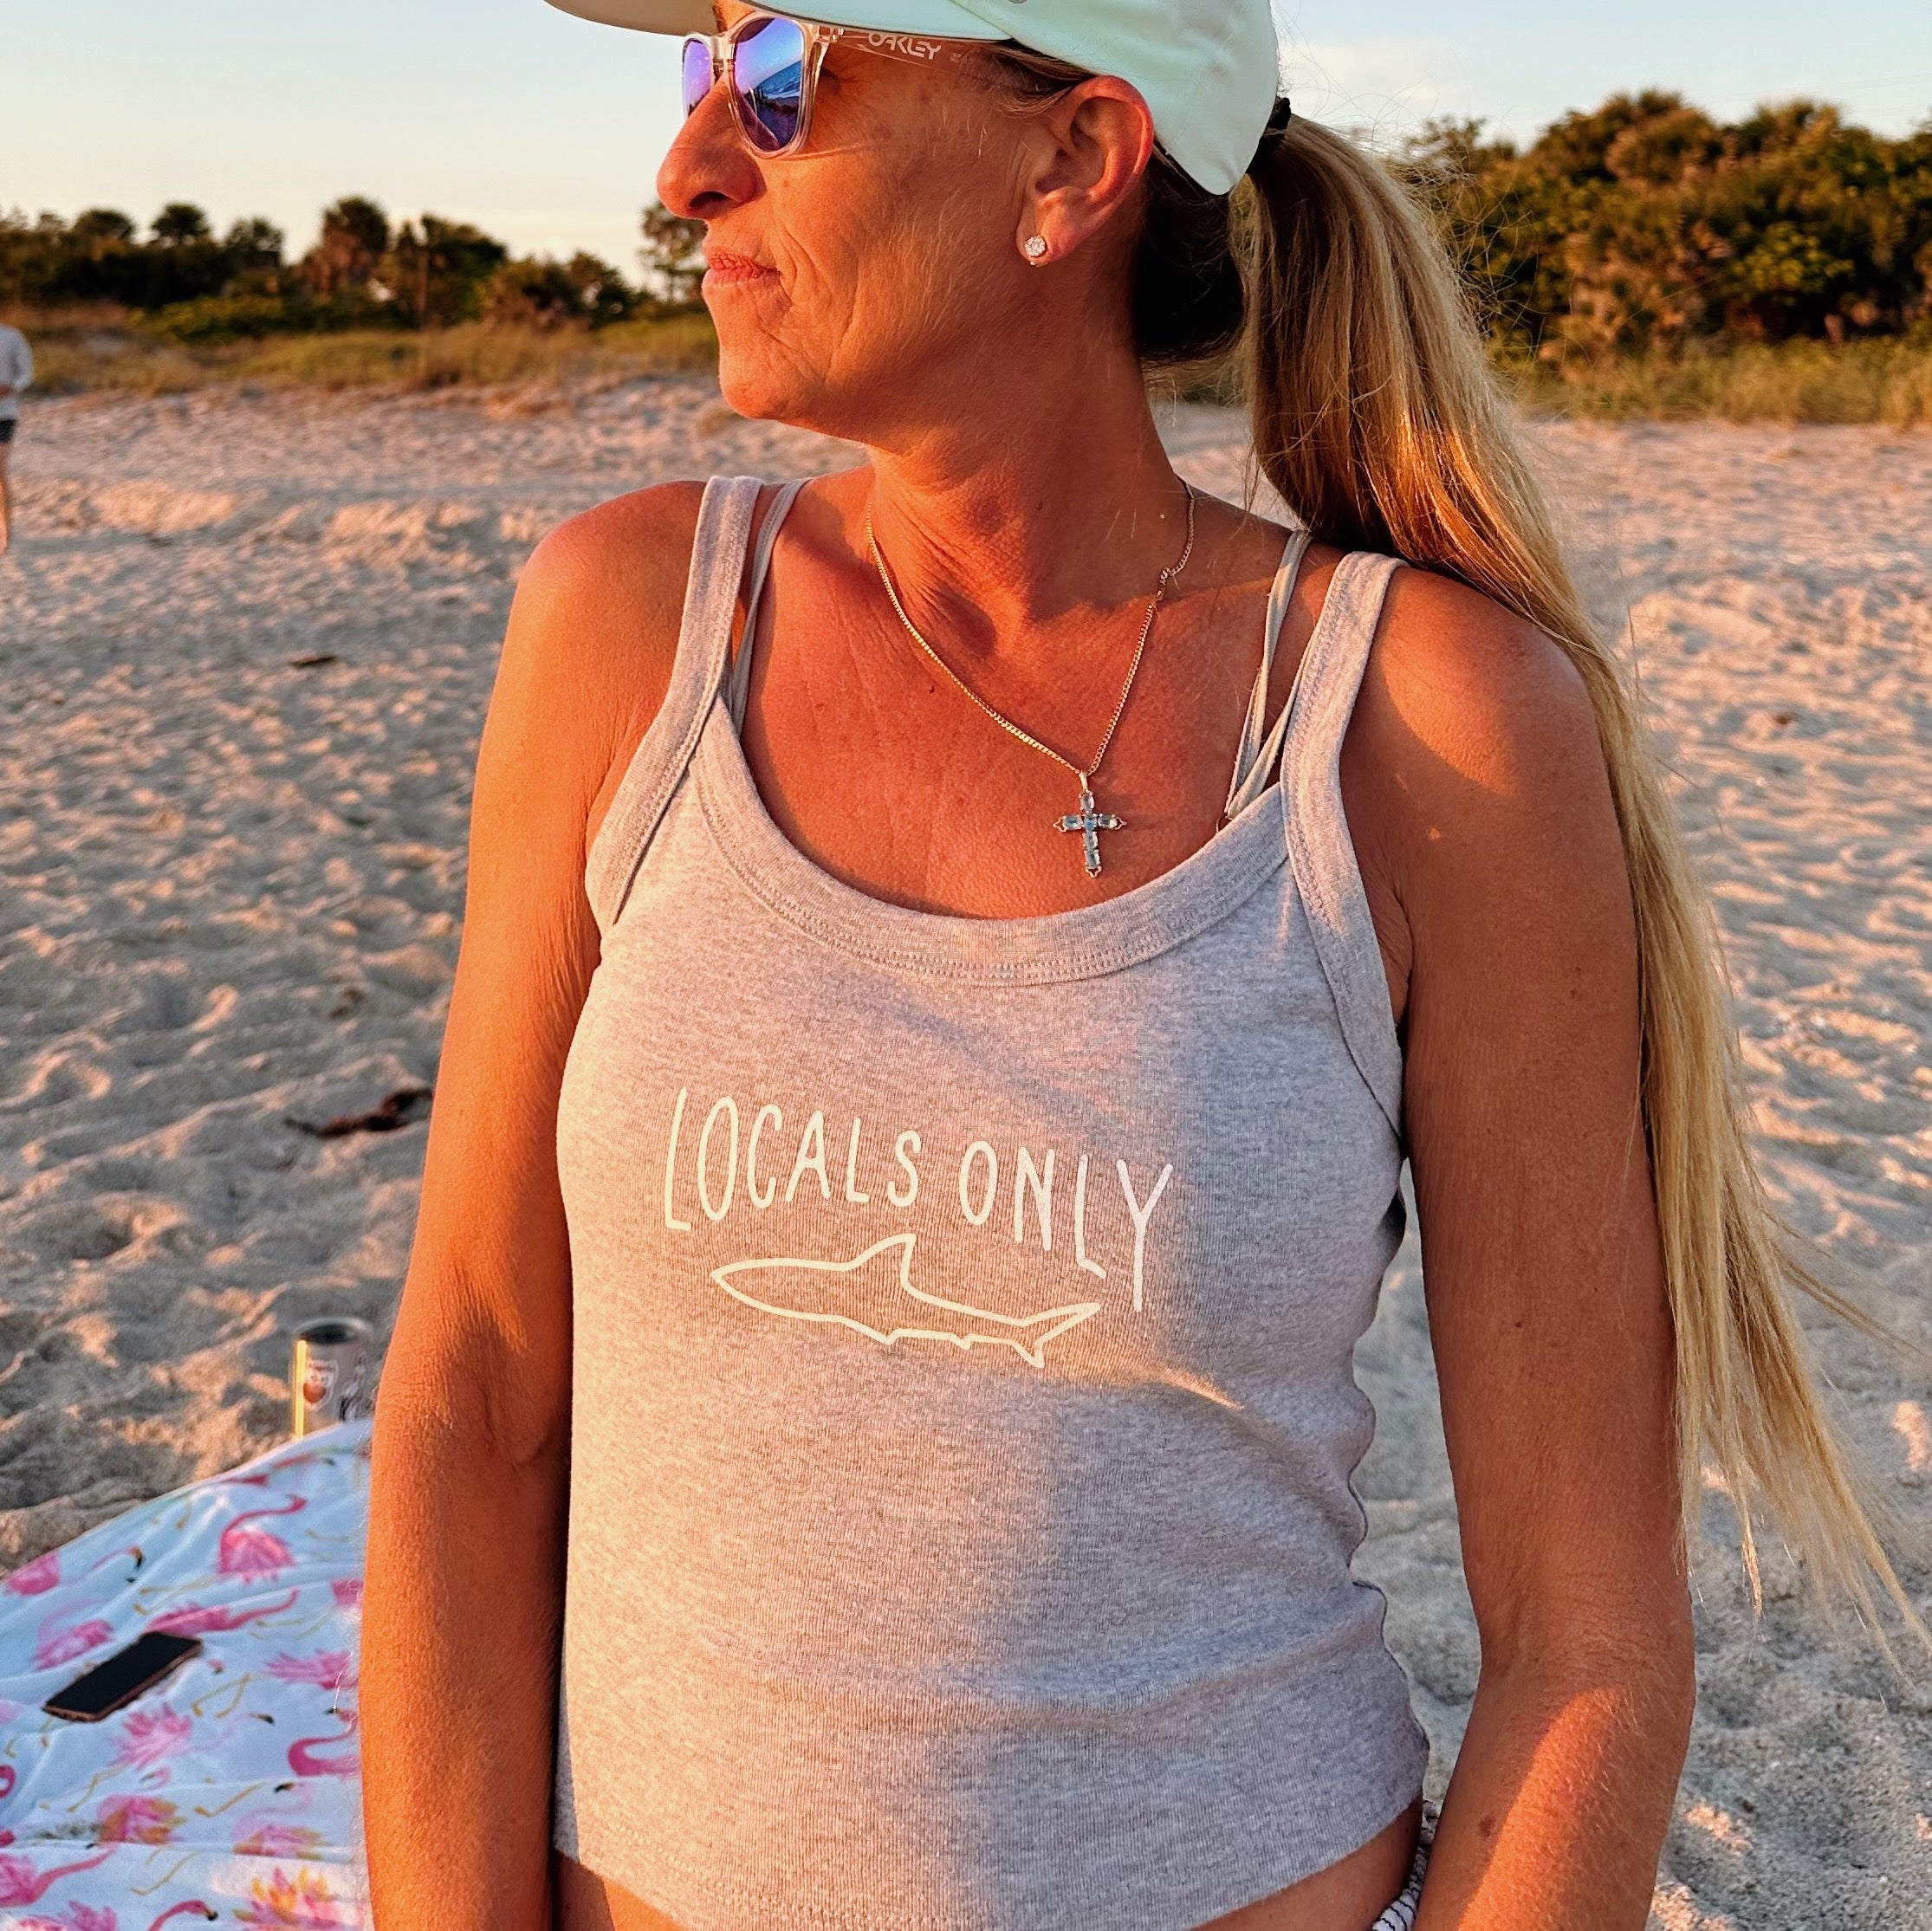 Locals Only Tank